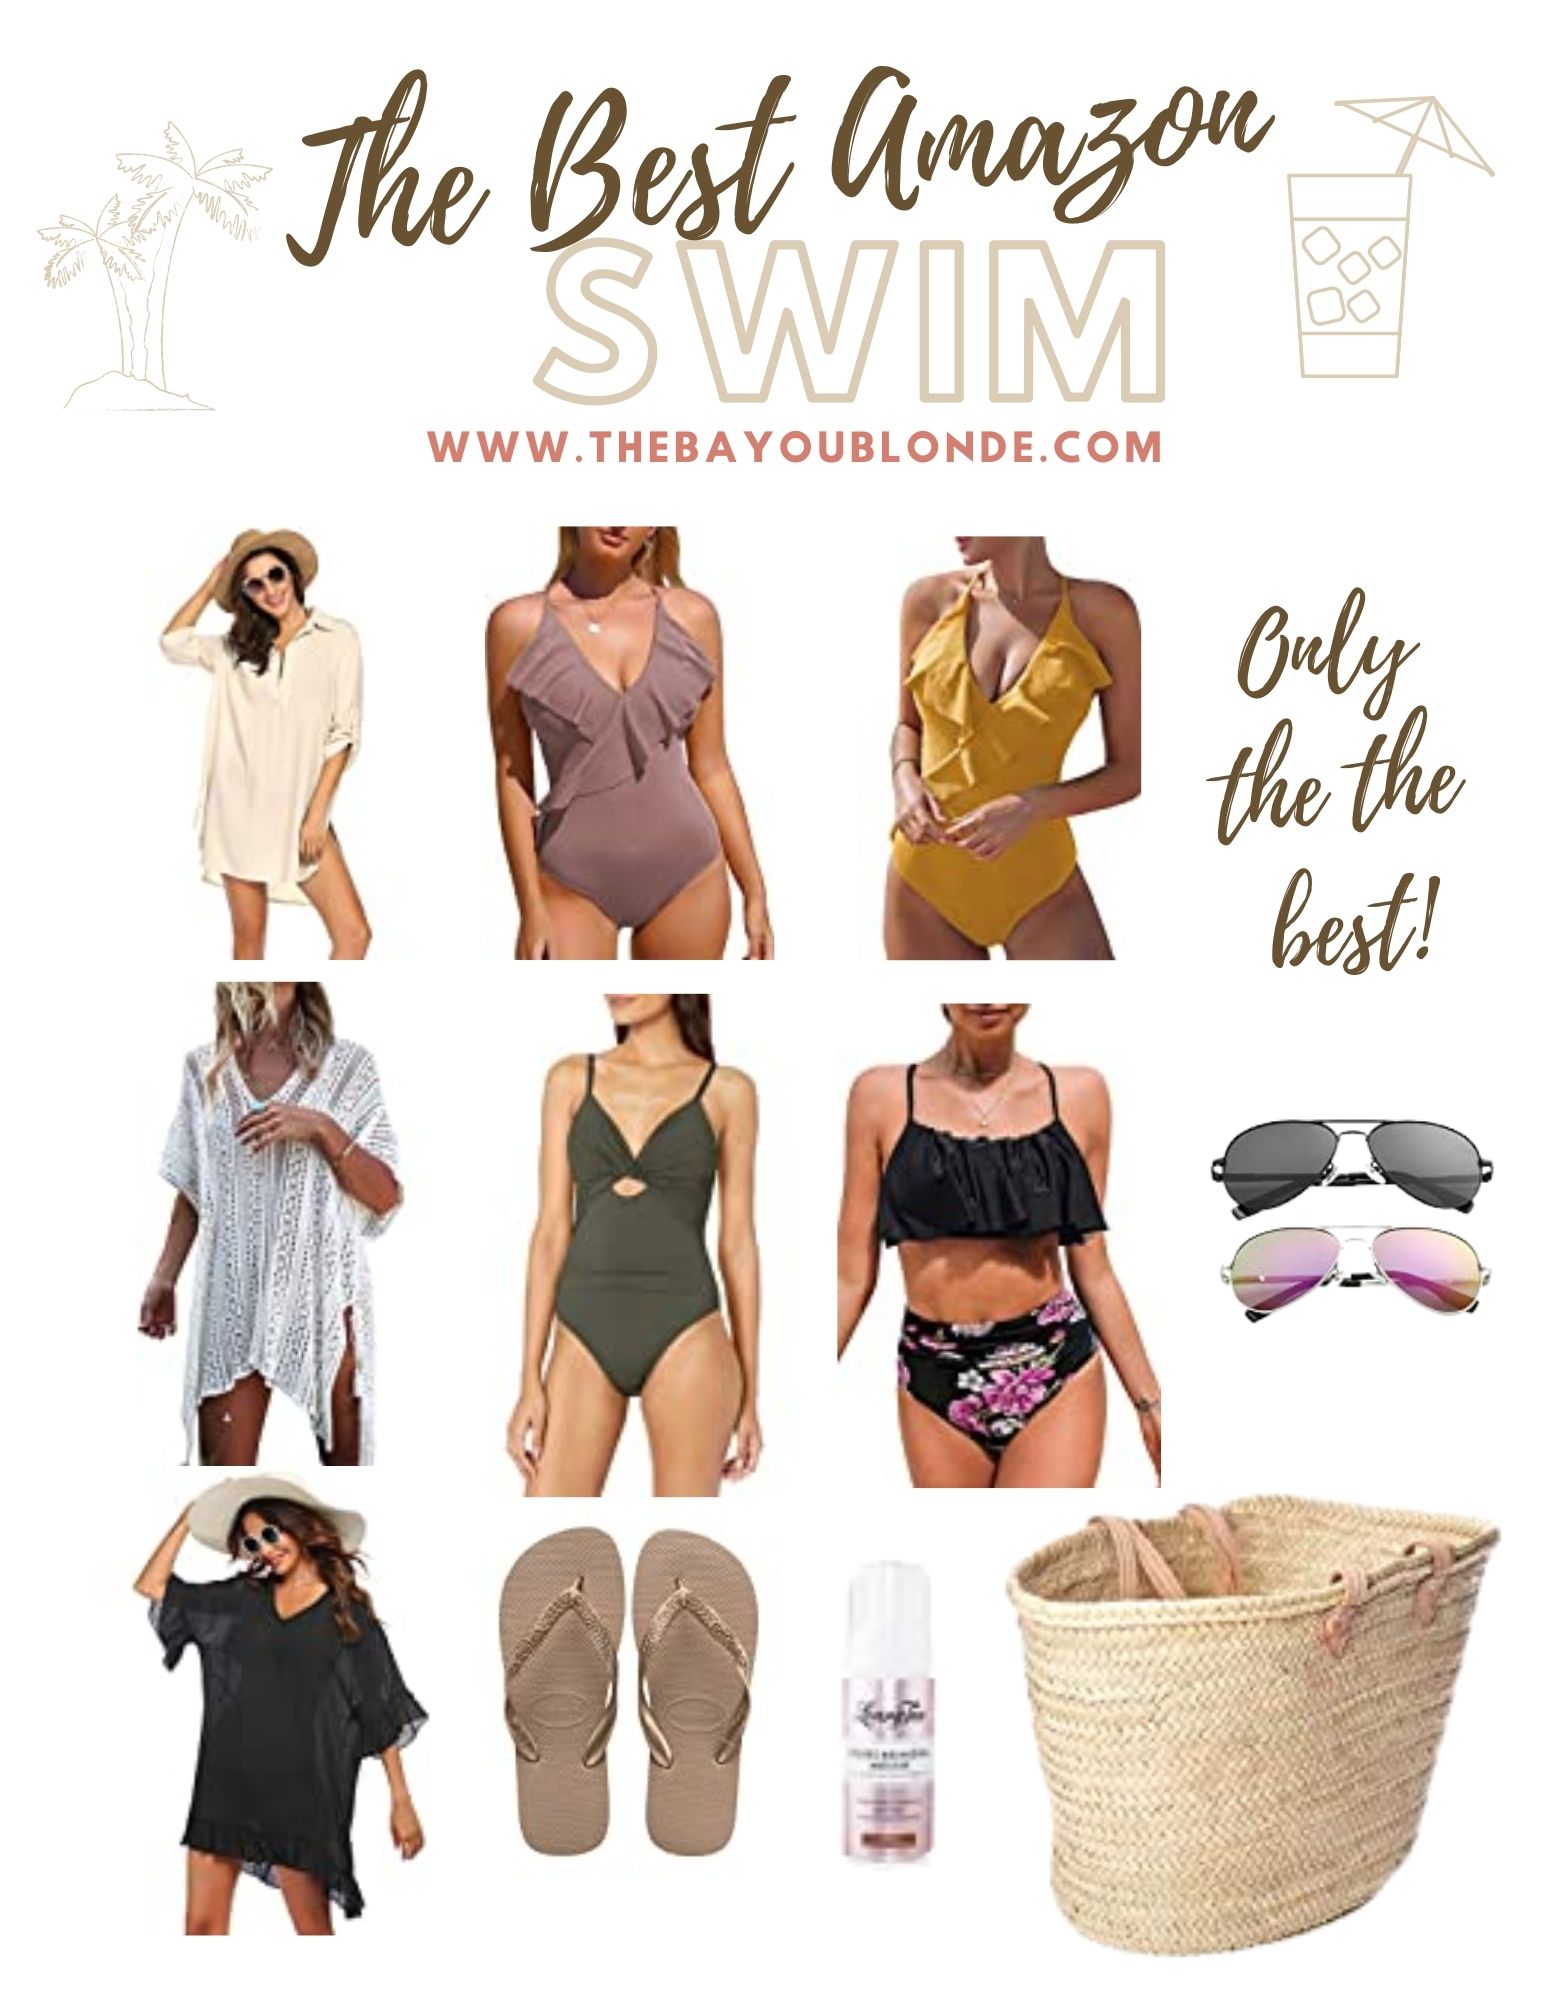 Amazon Favorites: My Top Women’s Swimsuits and Beach Accessories